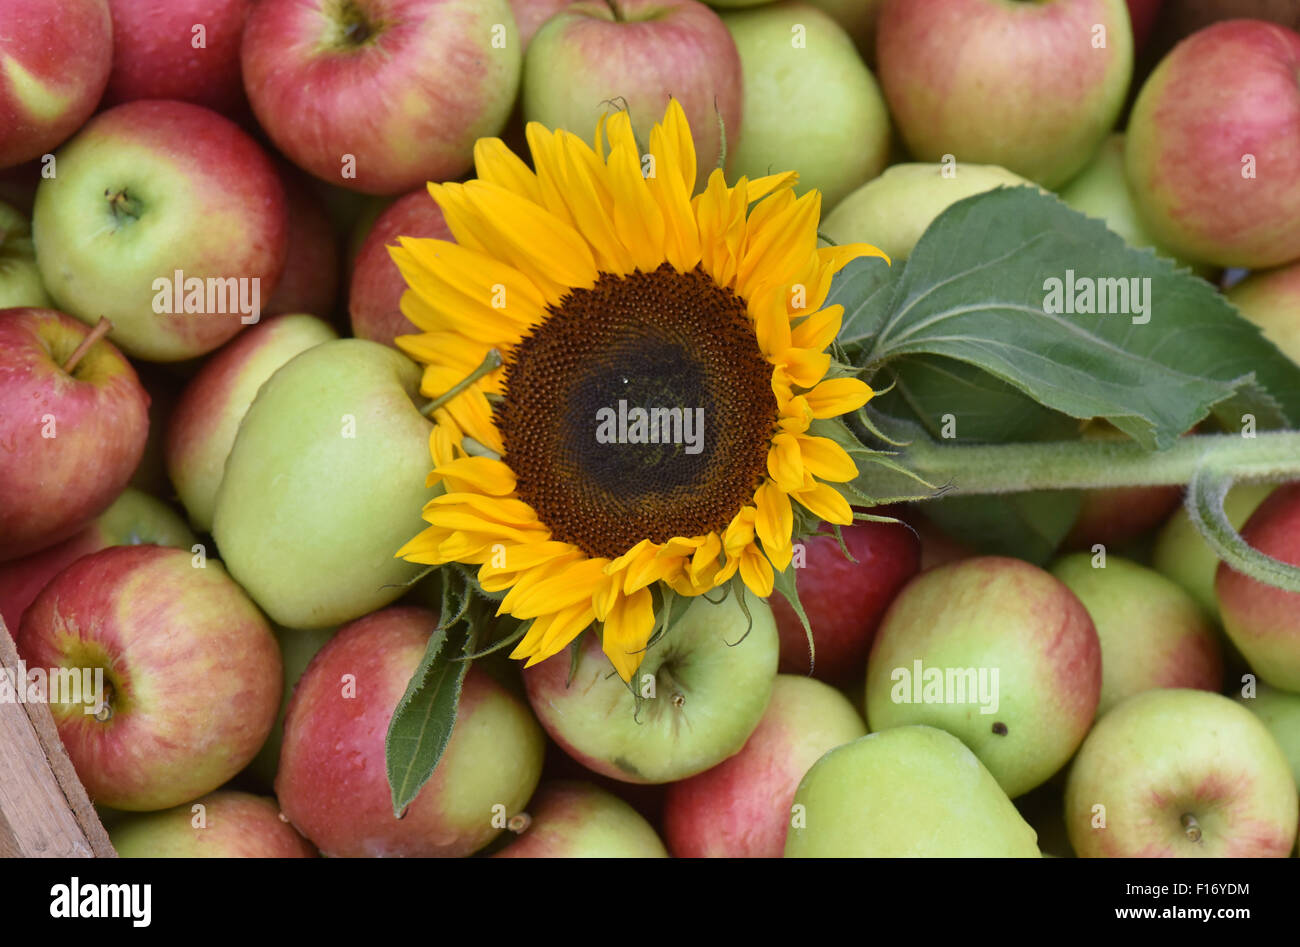 A sunflower lies on the firstof this season's apples in Kreischa, Germany, 28 August 2015. An average apple harvest of around 89,000 tons is expected in Saxony this year. Photo: Matthias Hiekel/ZB Stock Photo